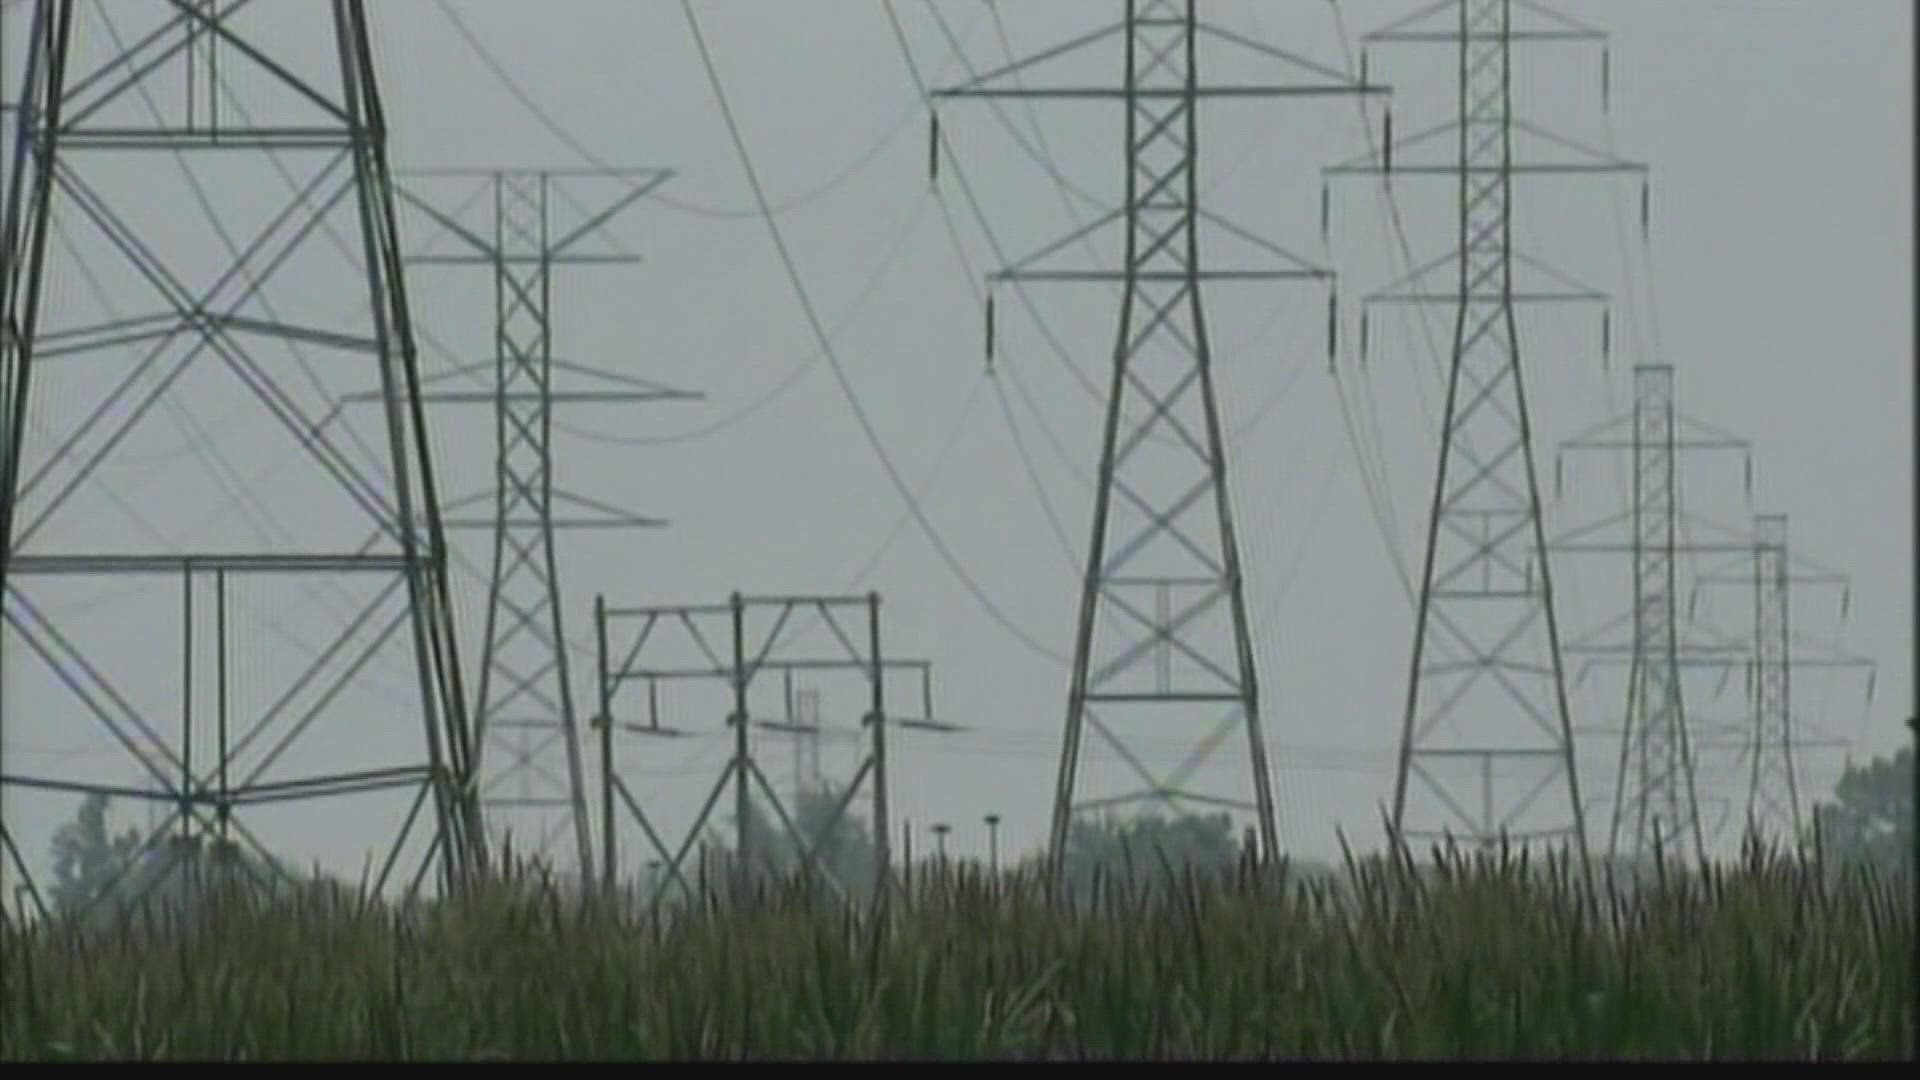 Dustin Grove looked at the risk of a power grid failure here and what we can all do to help.